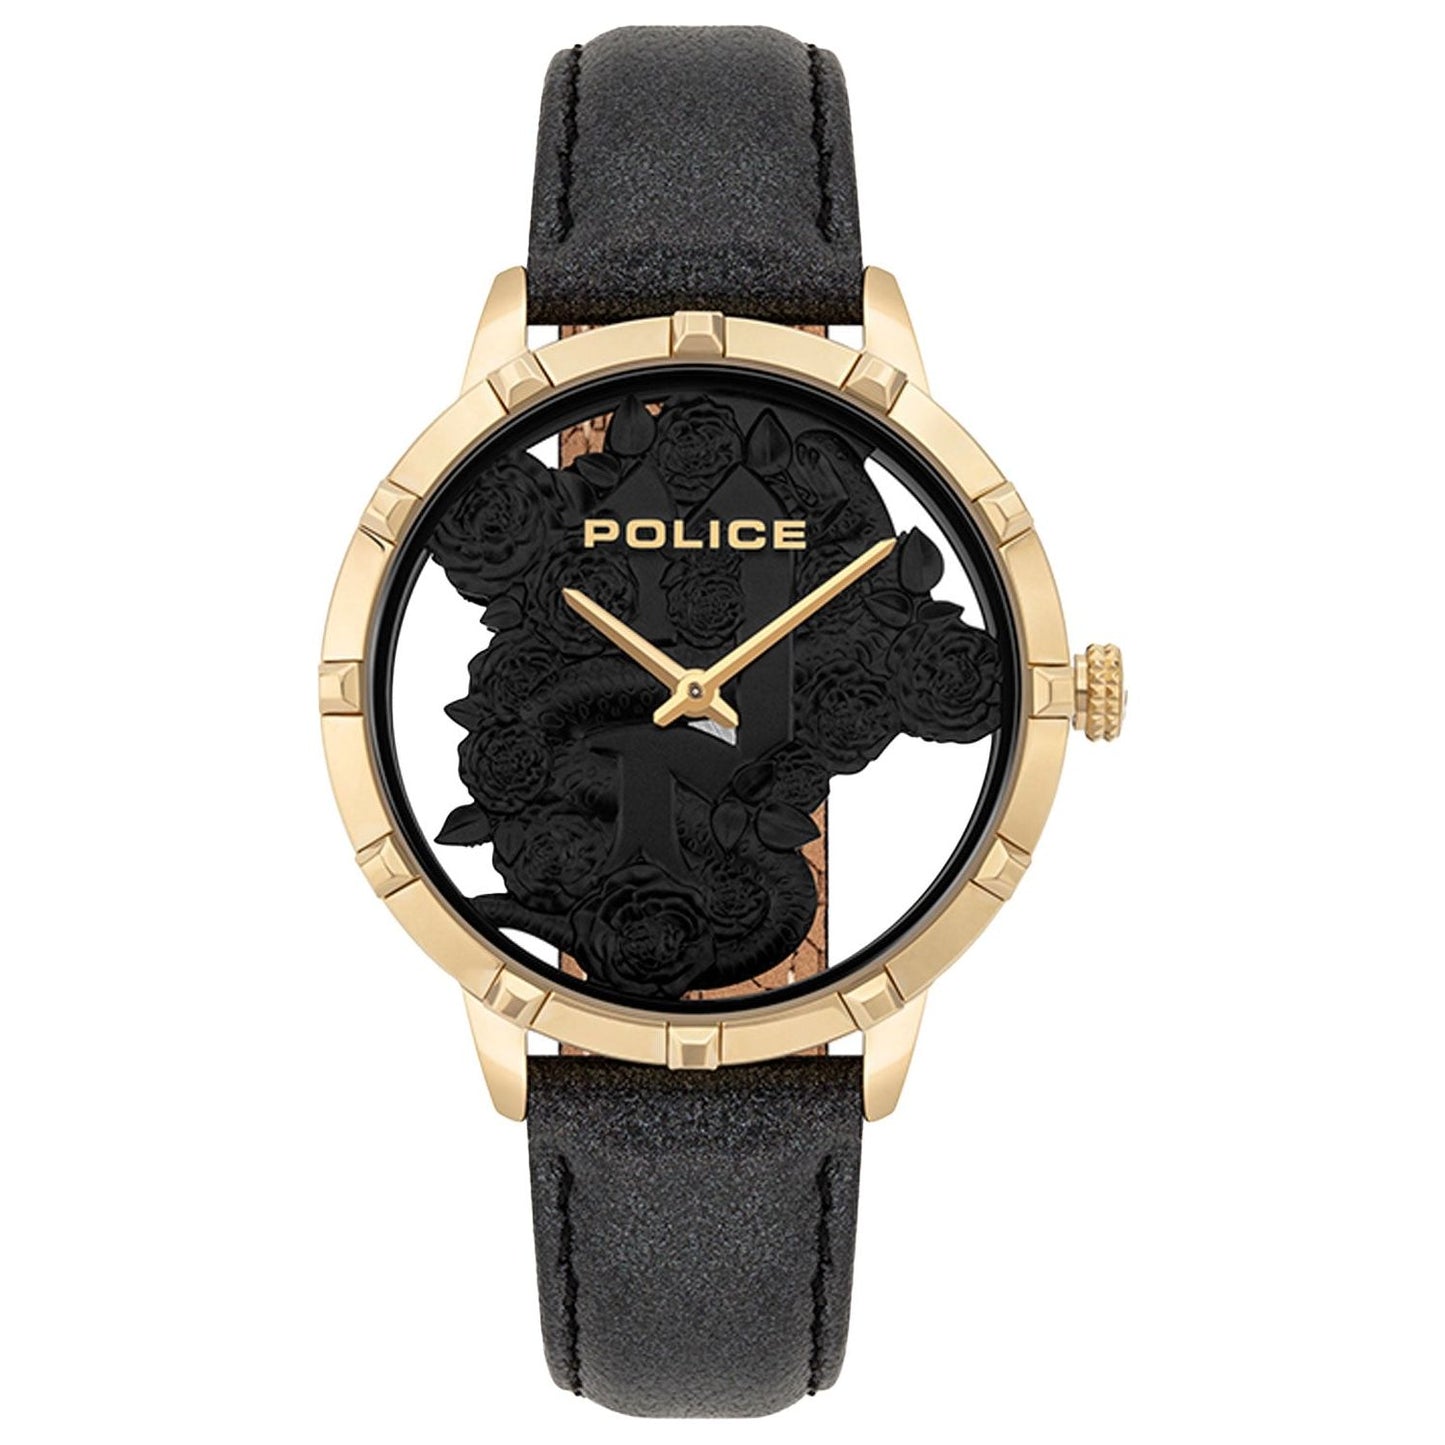 POLICE POLICE MOD. PL-16041MSG_02 WATCHES police-mod-pl-16041msg_02